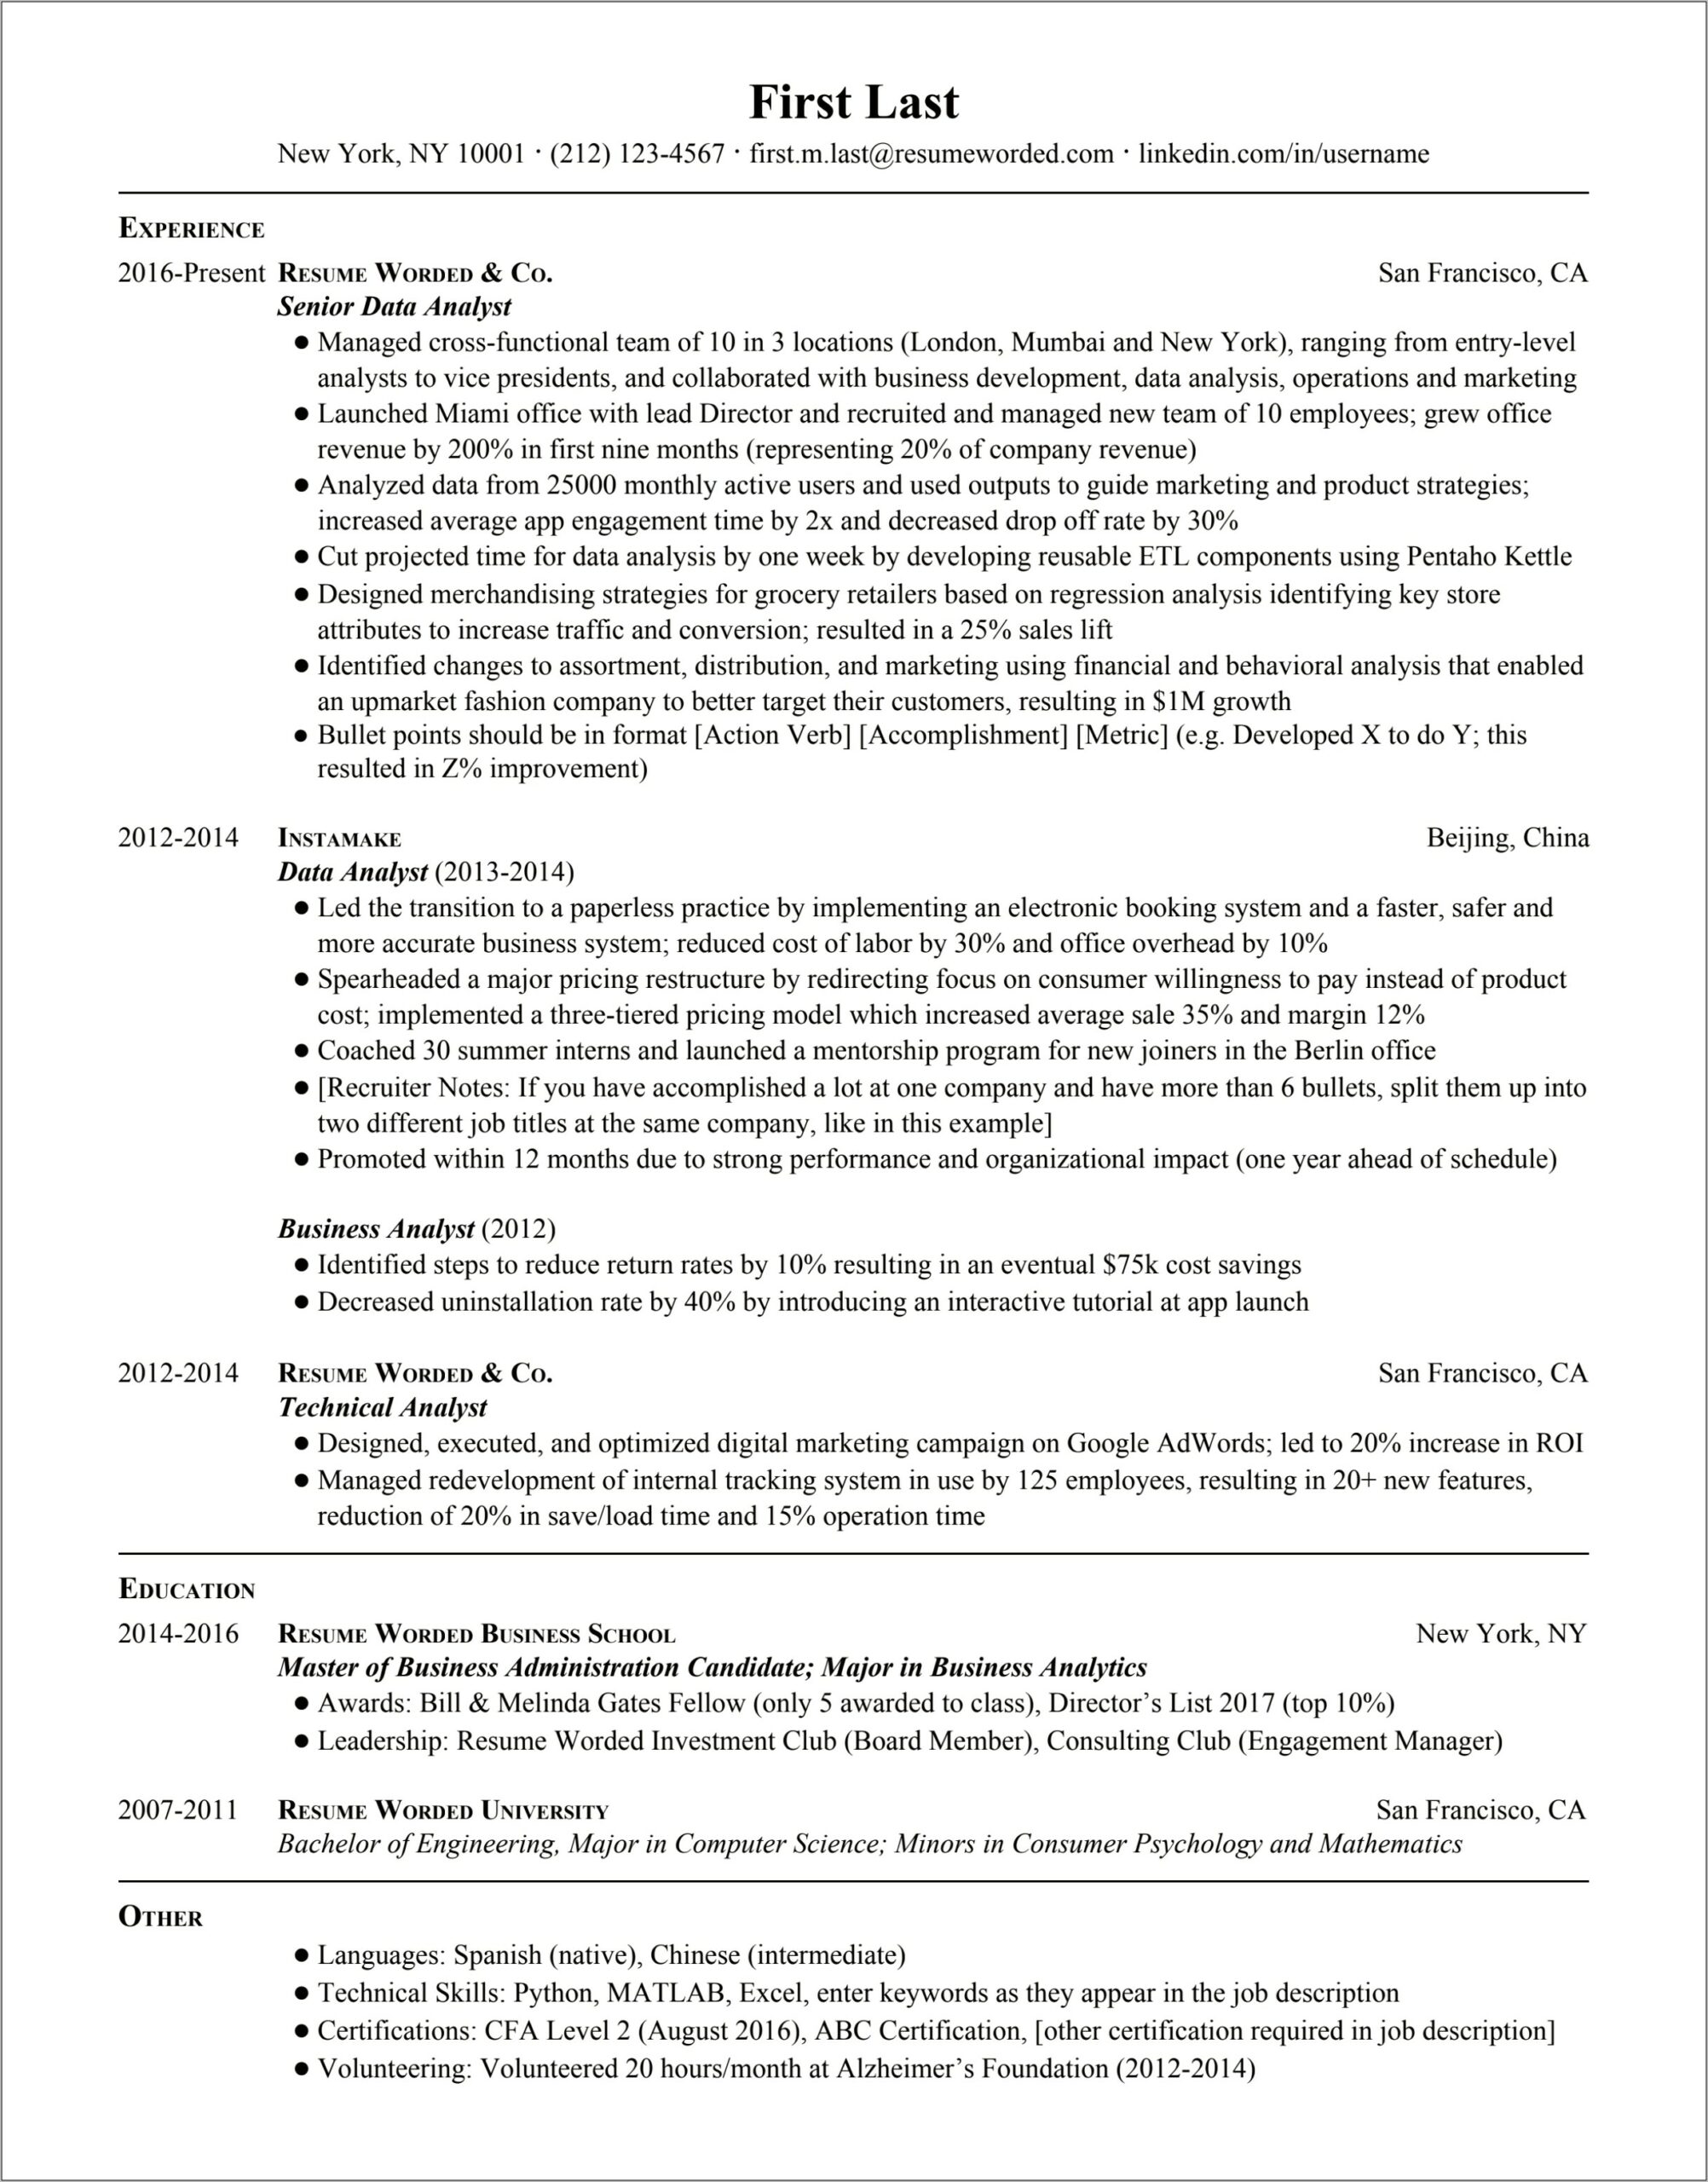 Business Analyst Resume Objective Sample